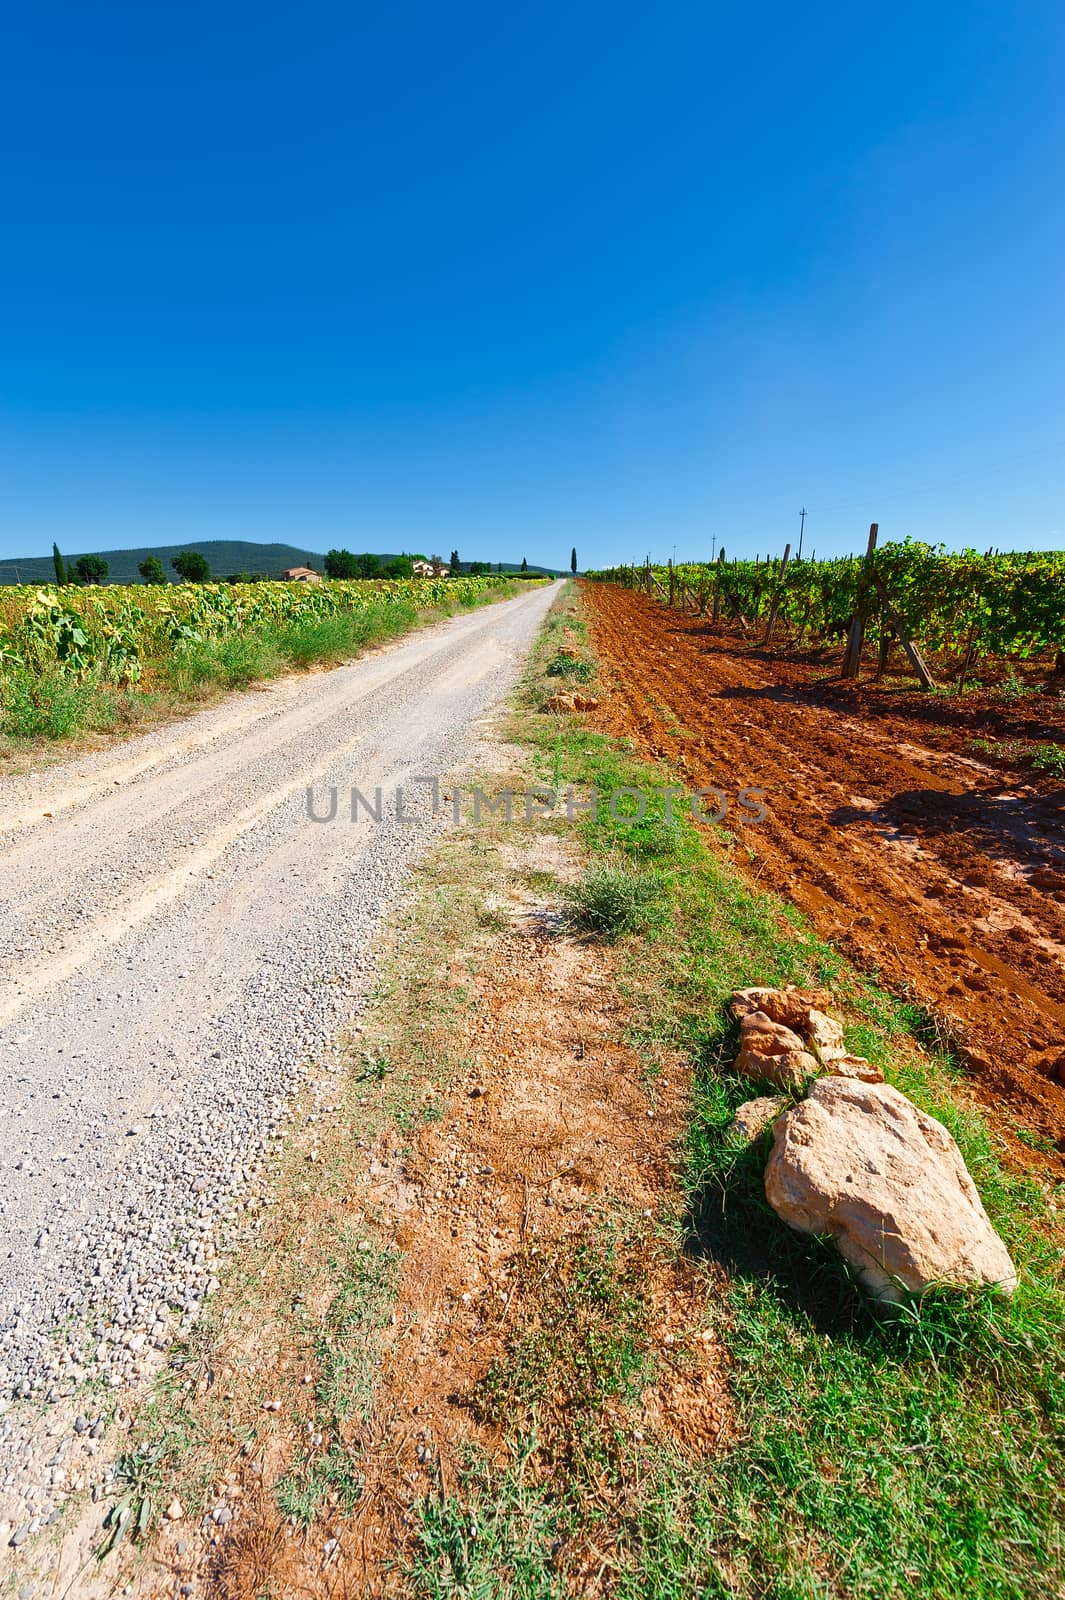 Dirt Road between Sunflower Field and Vineyards in Tuscany, Italy